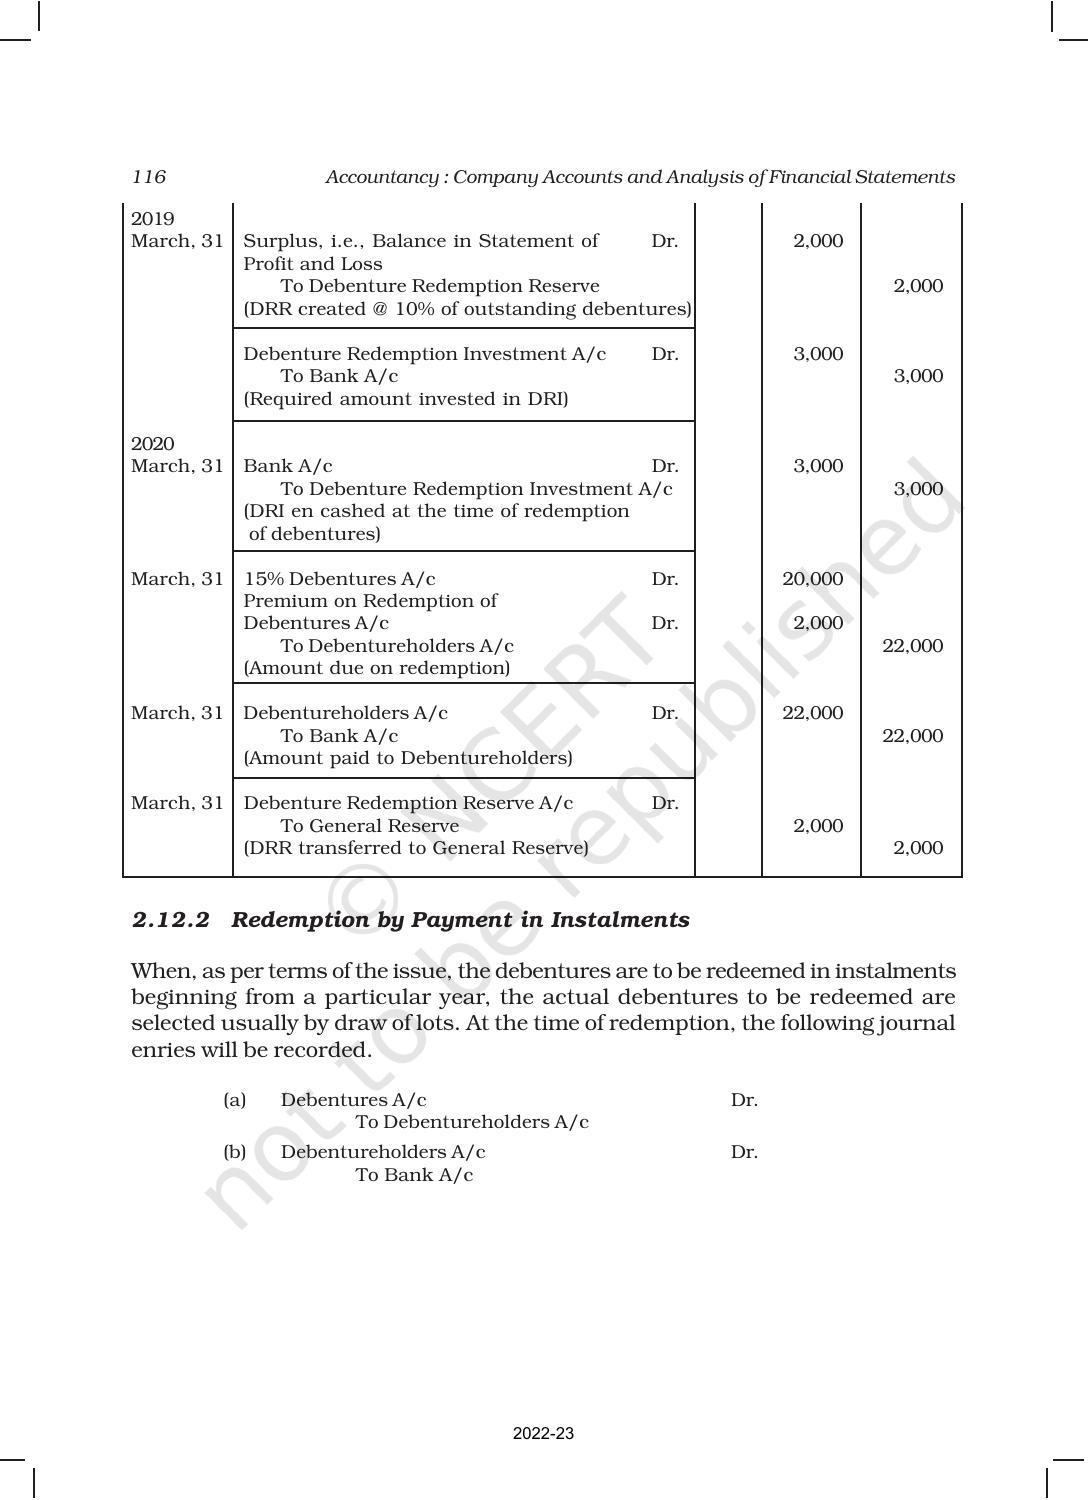 NCERT Book for Class 12 Accountancy Part II Chapter 1 Issue and Redemption of Debentures - Page 42